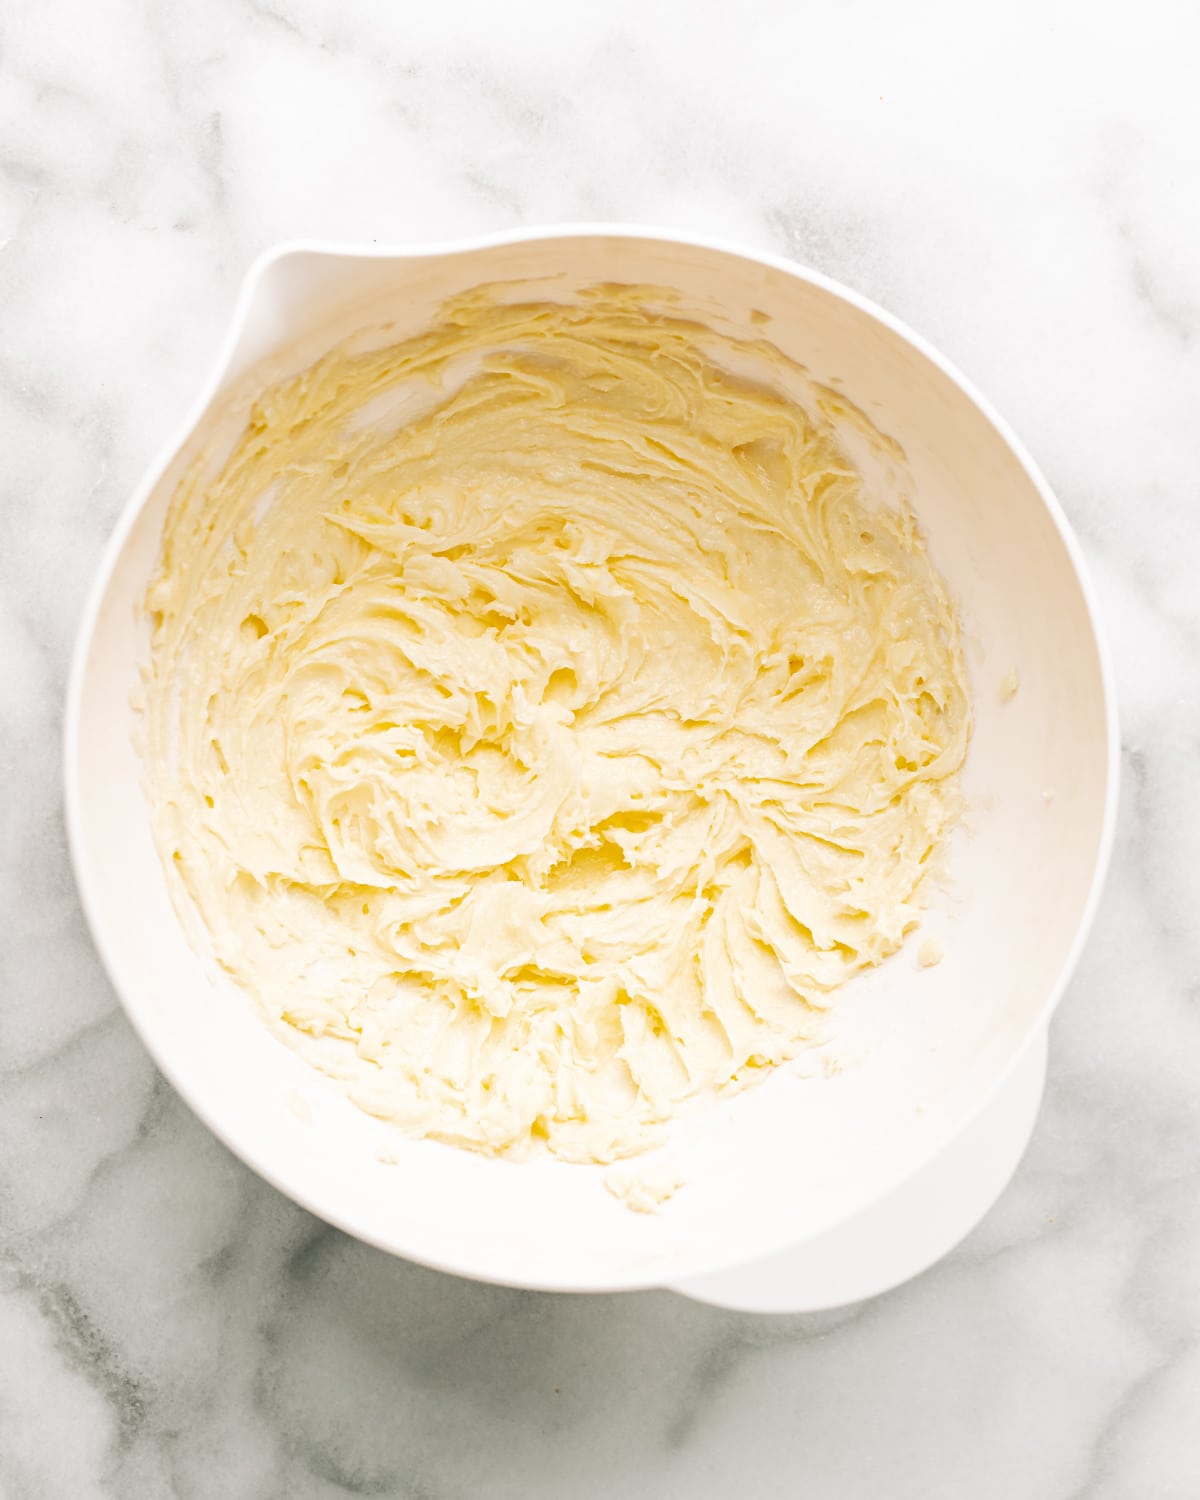 beaten butter and sugar in a mixing bowl.